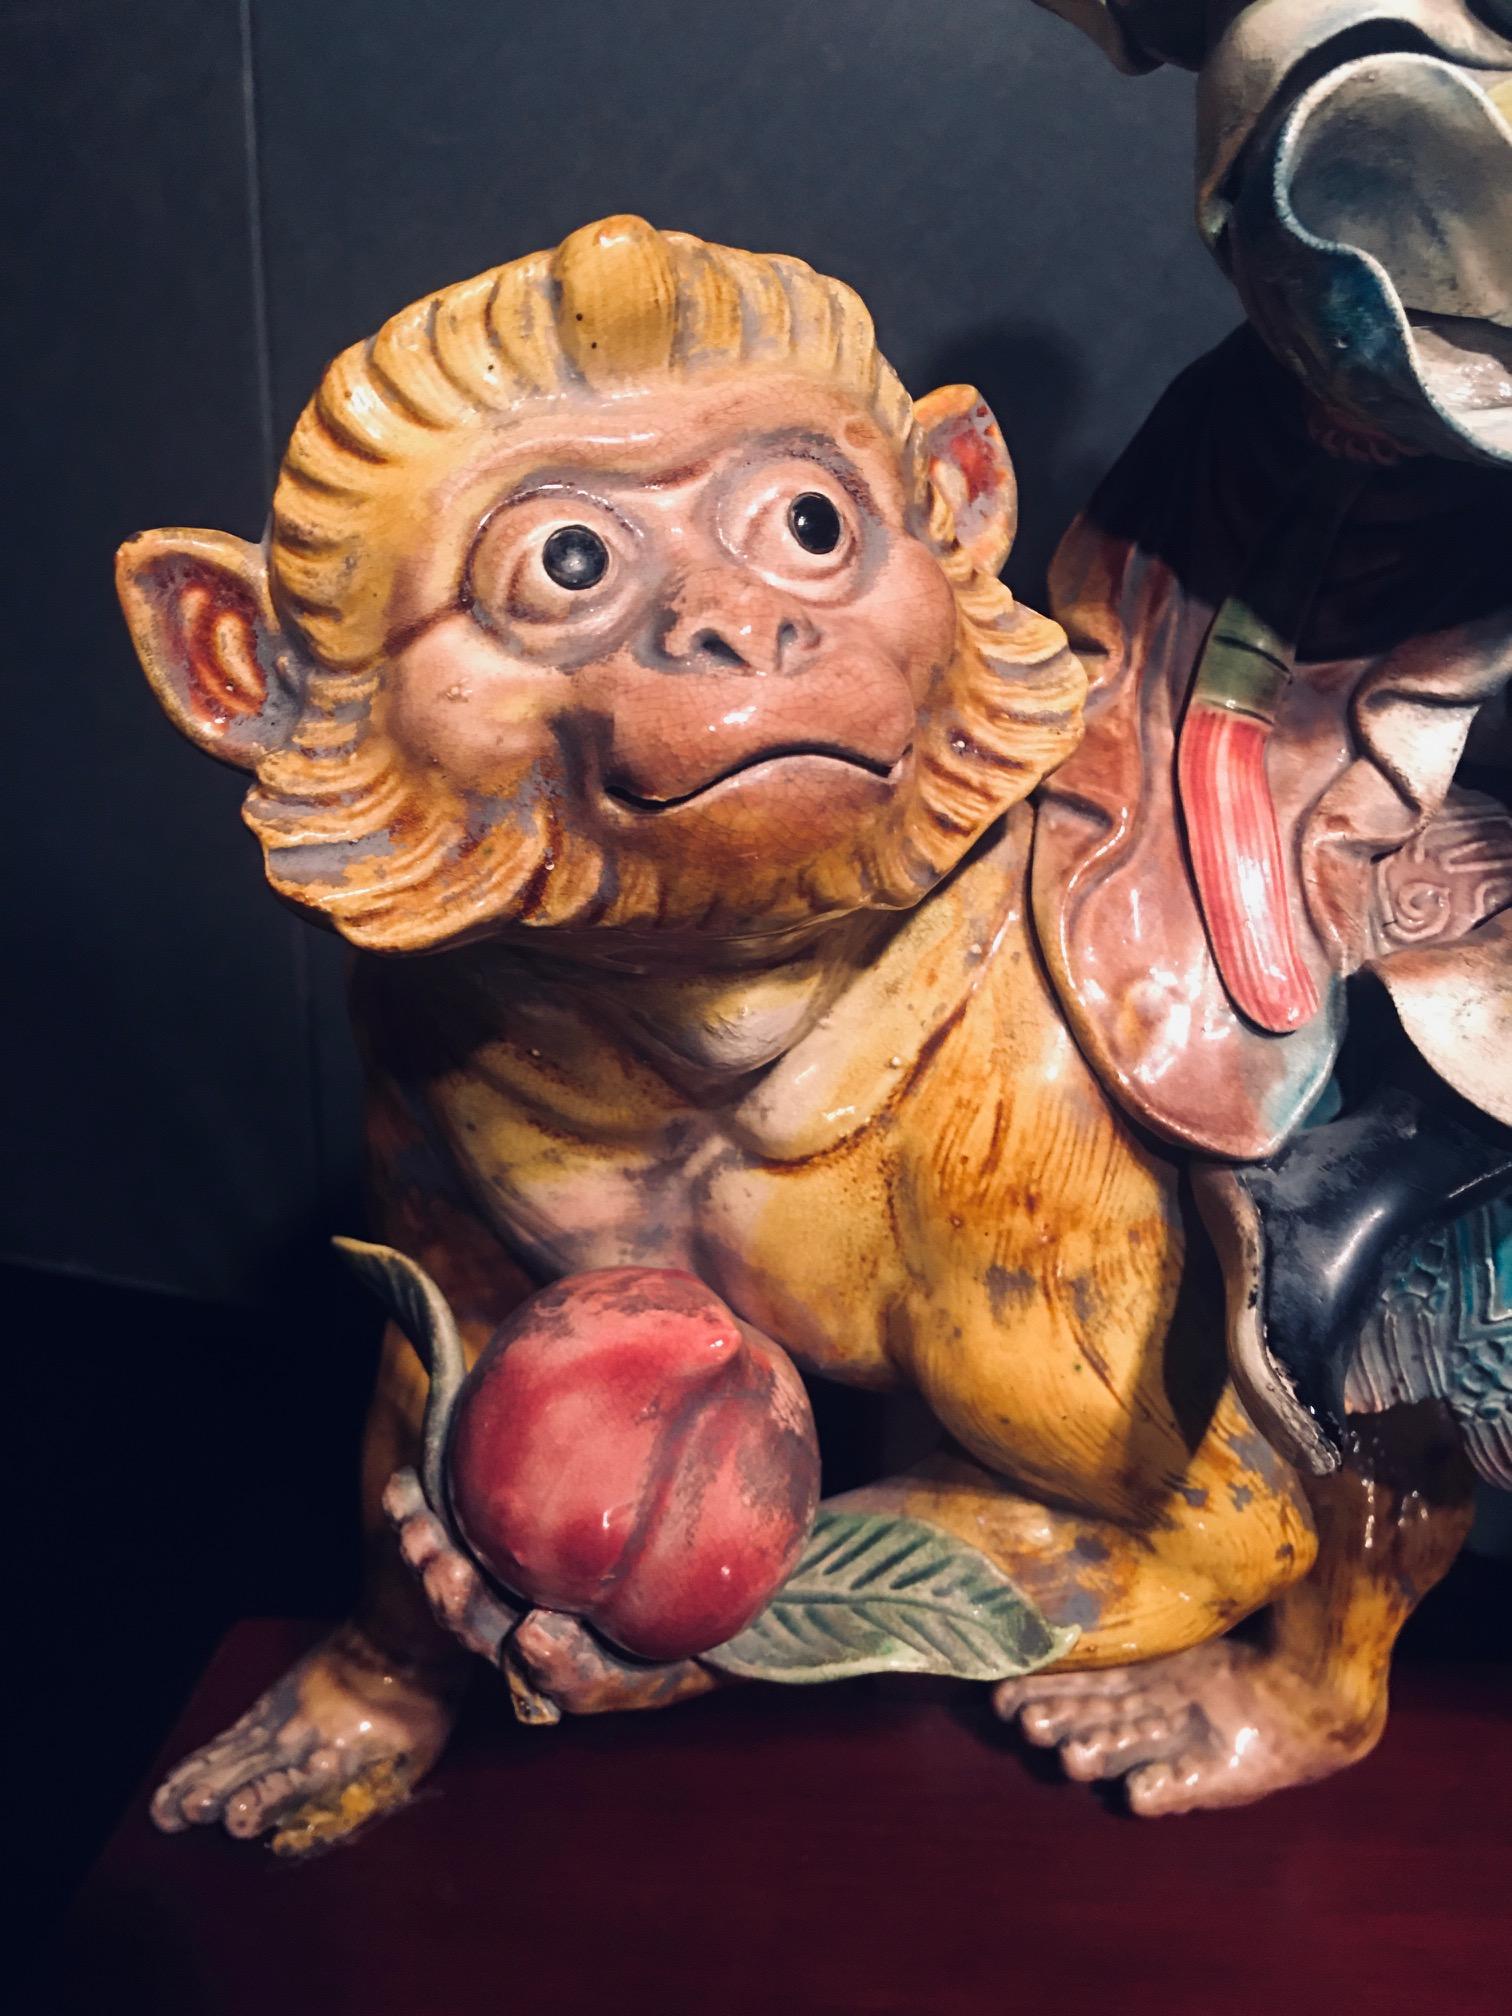 Chinese glazed porcelain roof tile of a warrior riding a monkey. The manufacture of glazed tiles was standardized in the Ming Dynasty and during the Qing Dynasty into the Republican Era, glazed tiles became ever more popular for top-tier buildings,